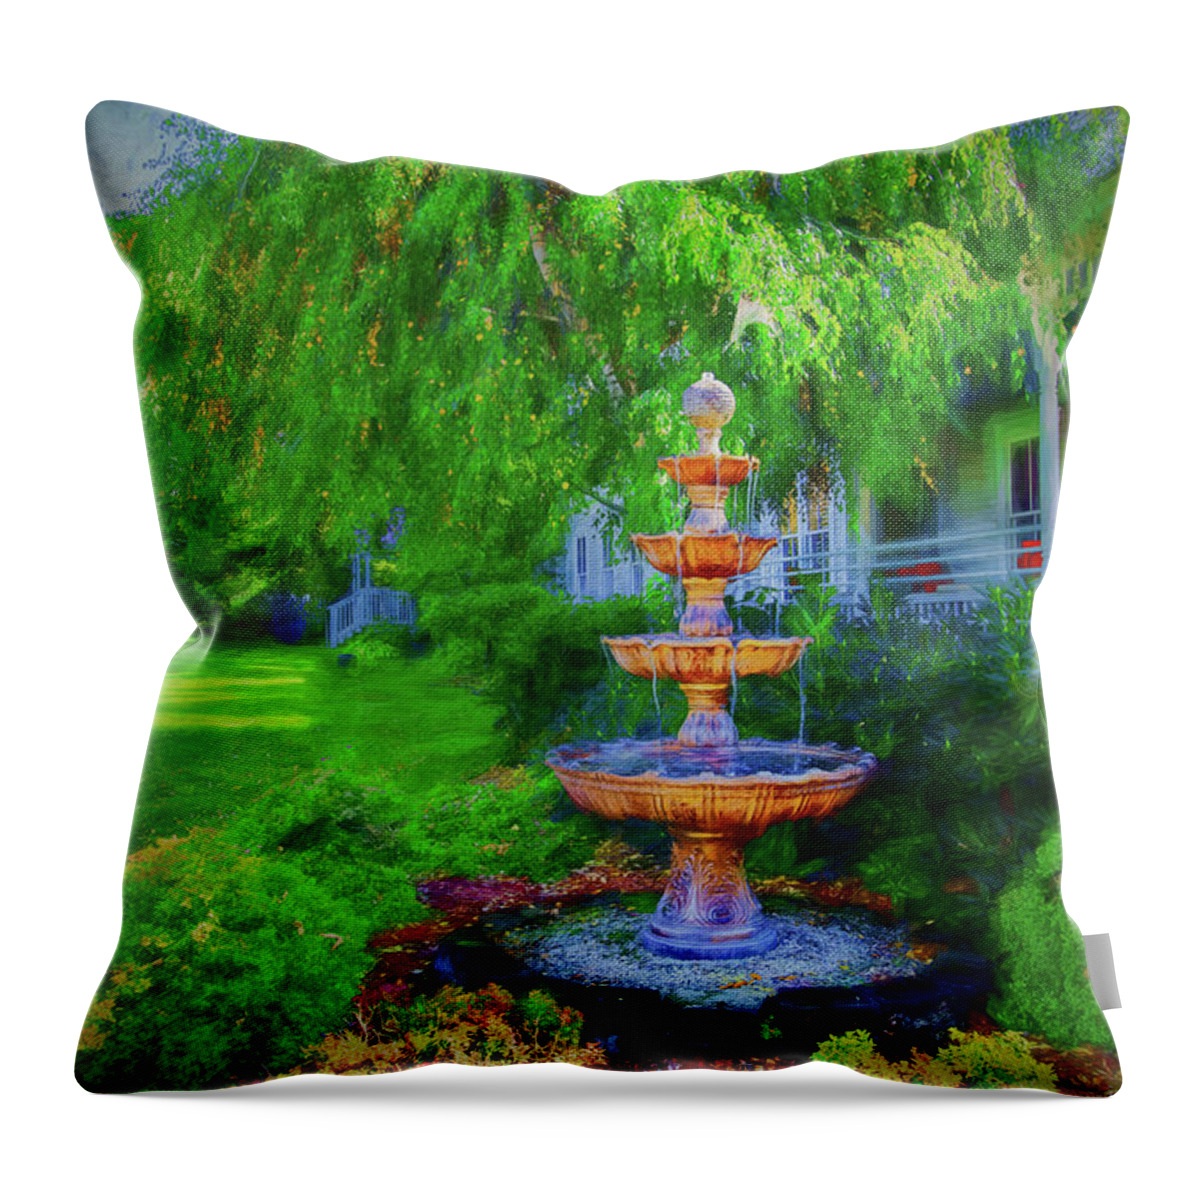 Artistic Renditions Autumn Throw Pillow featuring the photograph Bronze Fountain Perspective by Rick Bragan